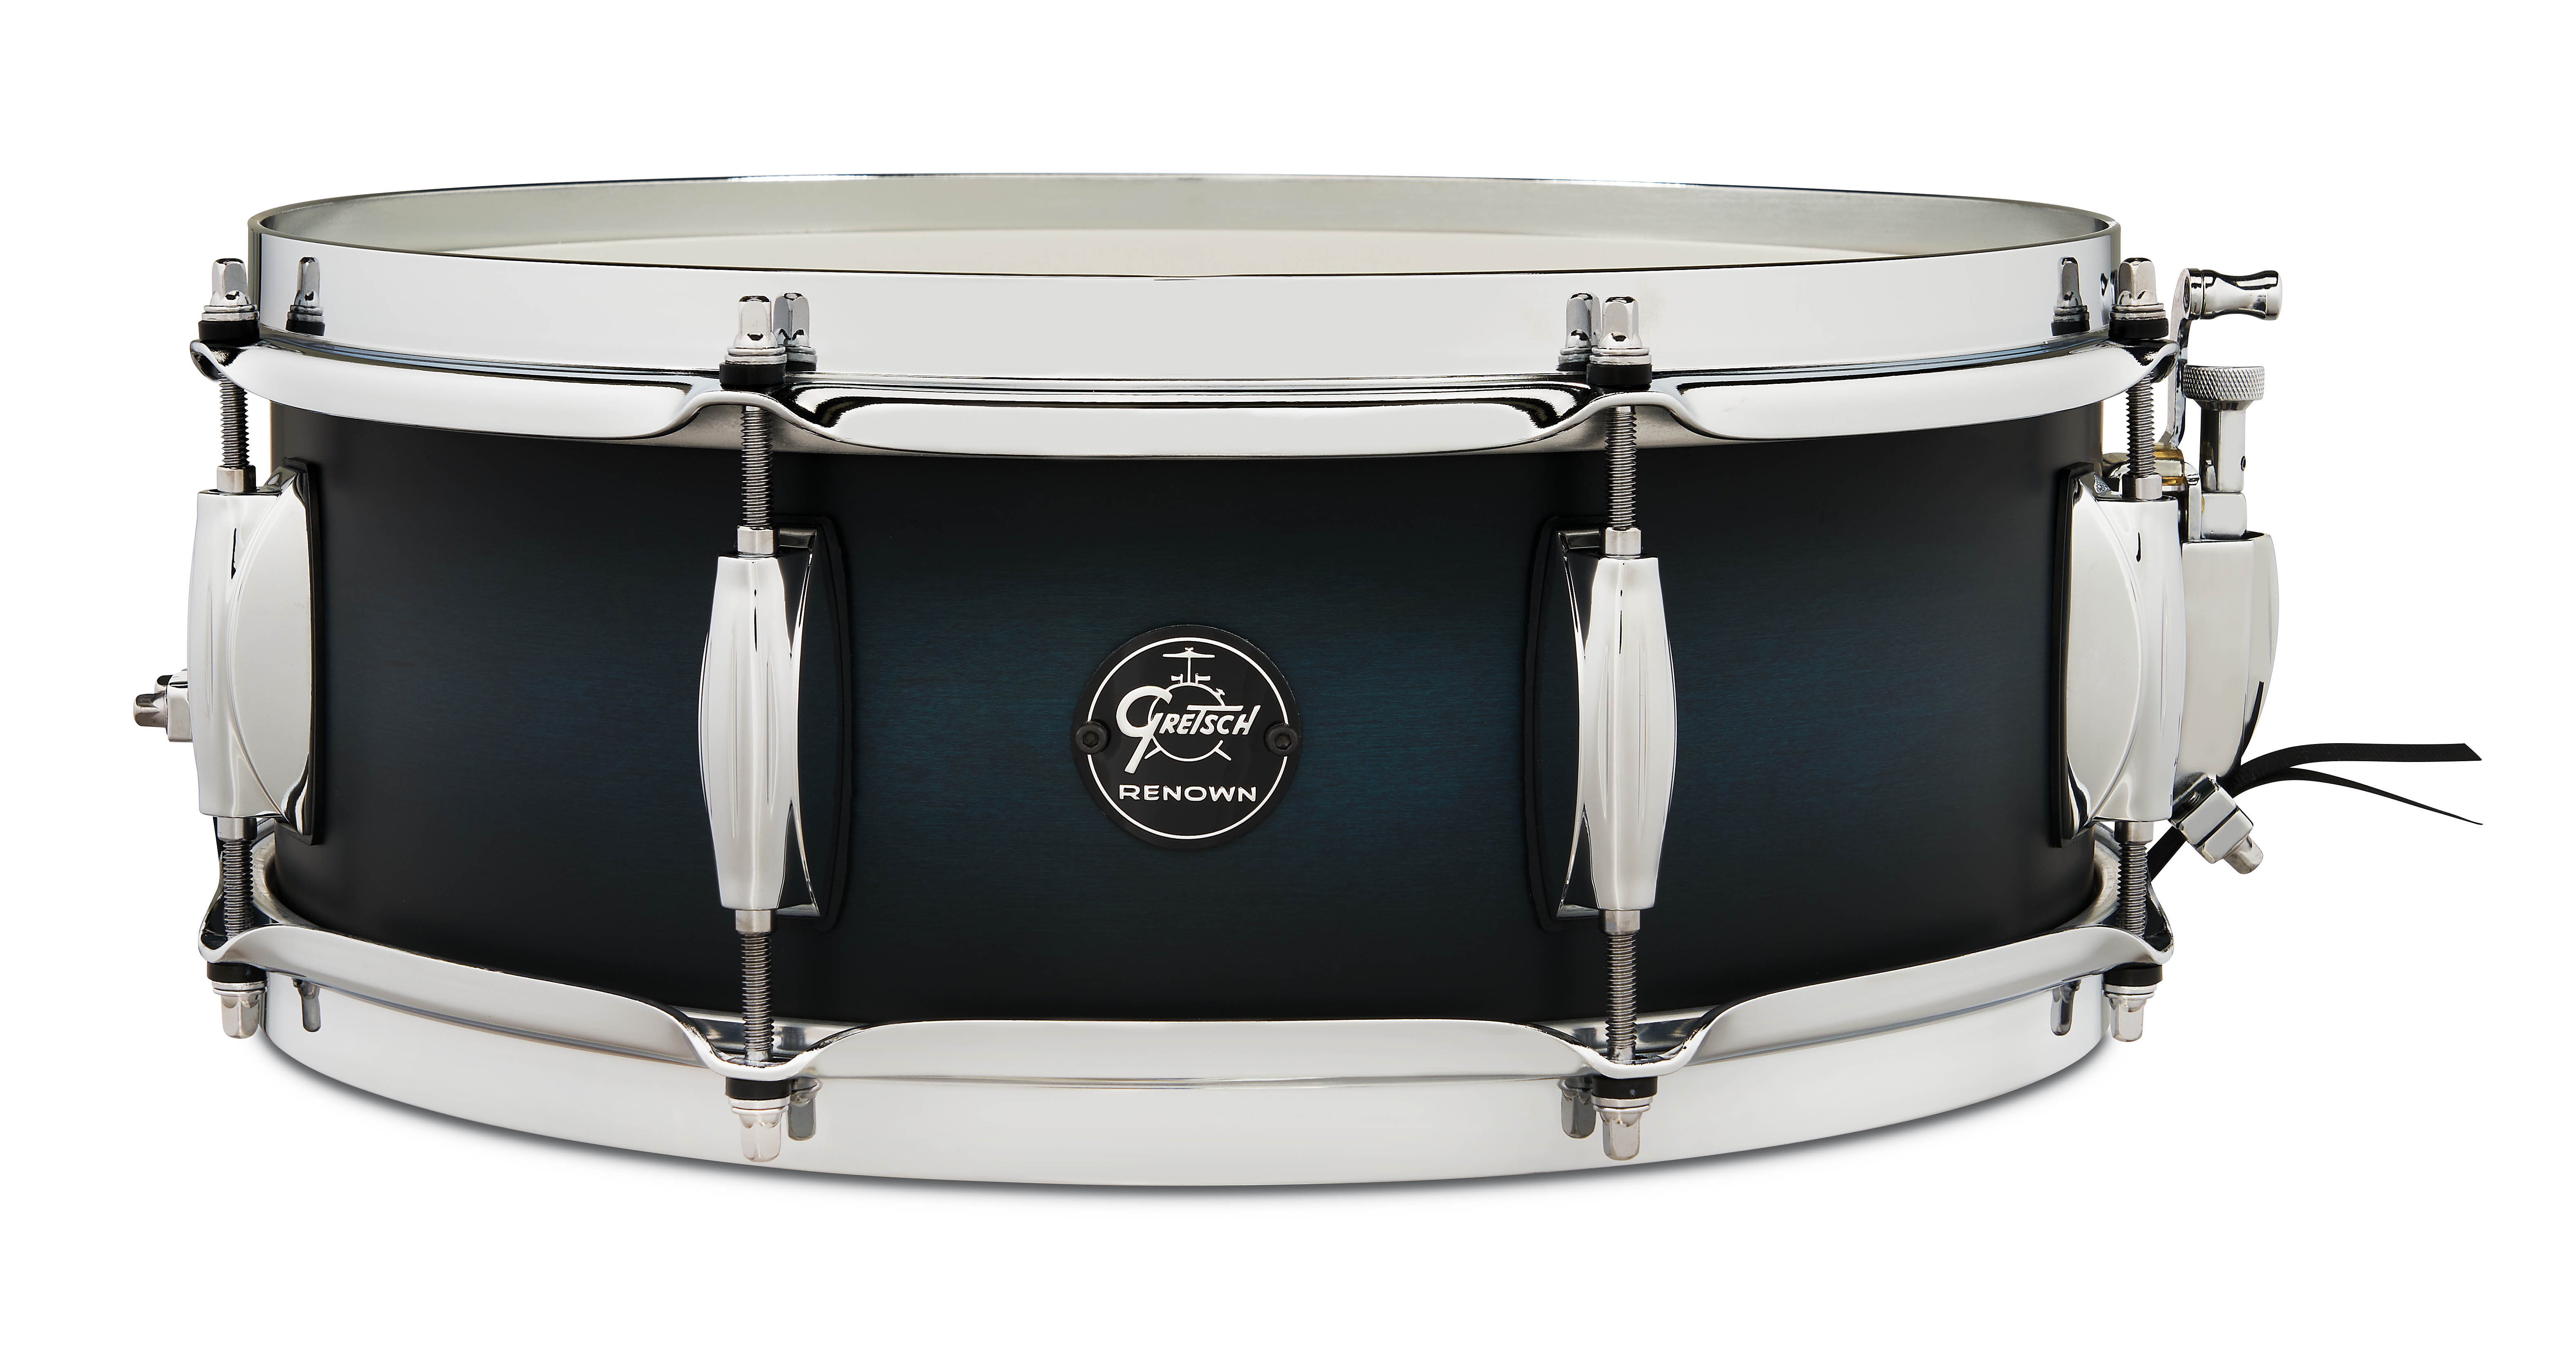 Gretsch Renown 2 5x14 Snare - Snare Drums - Paradiddles Drum Shop 